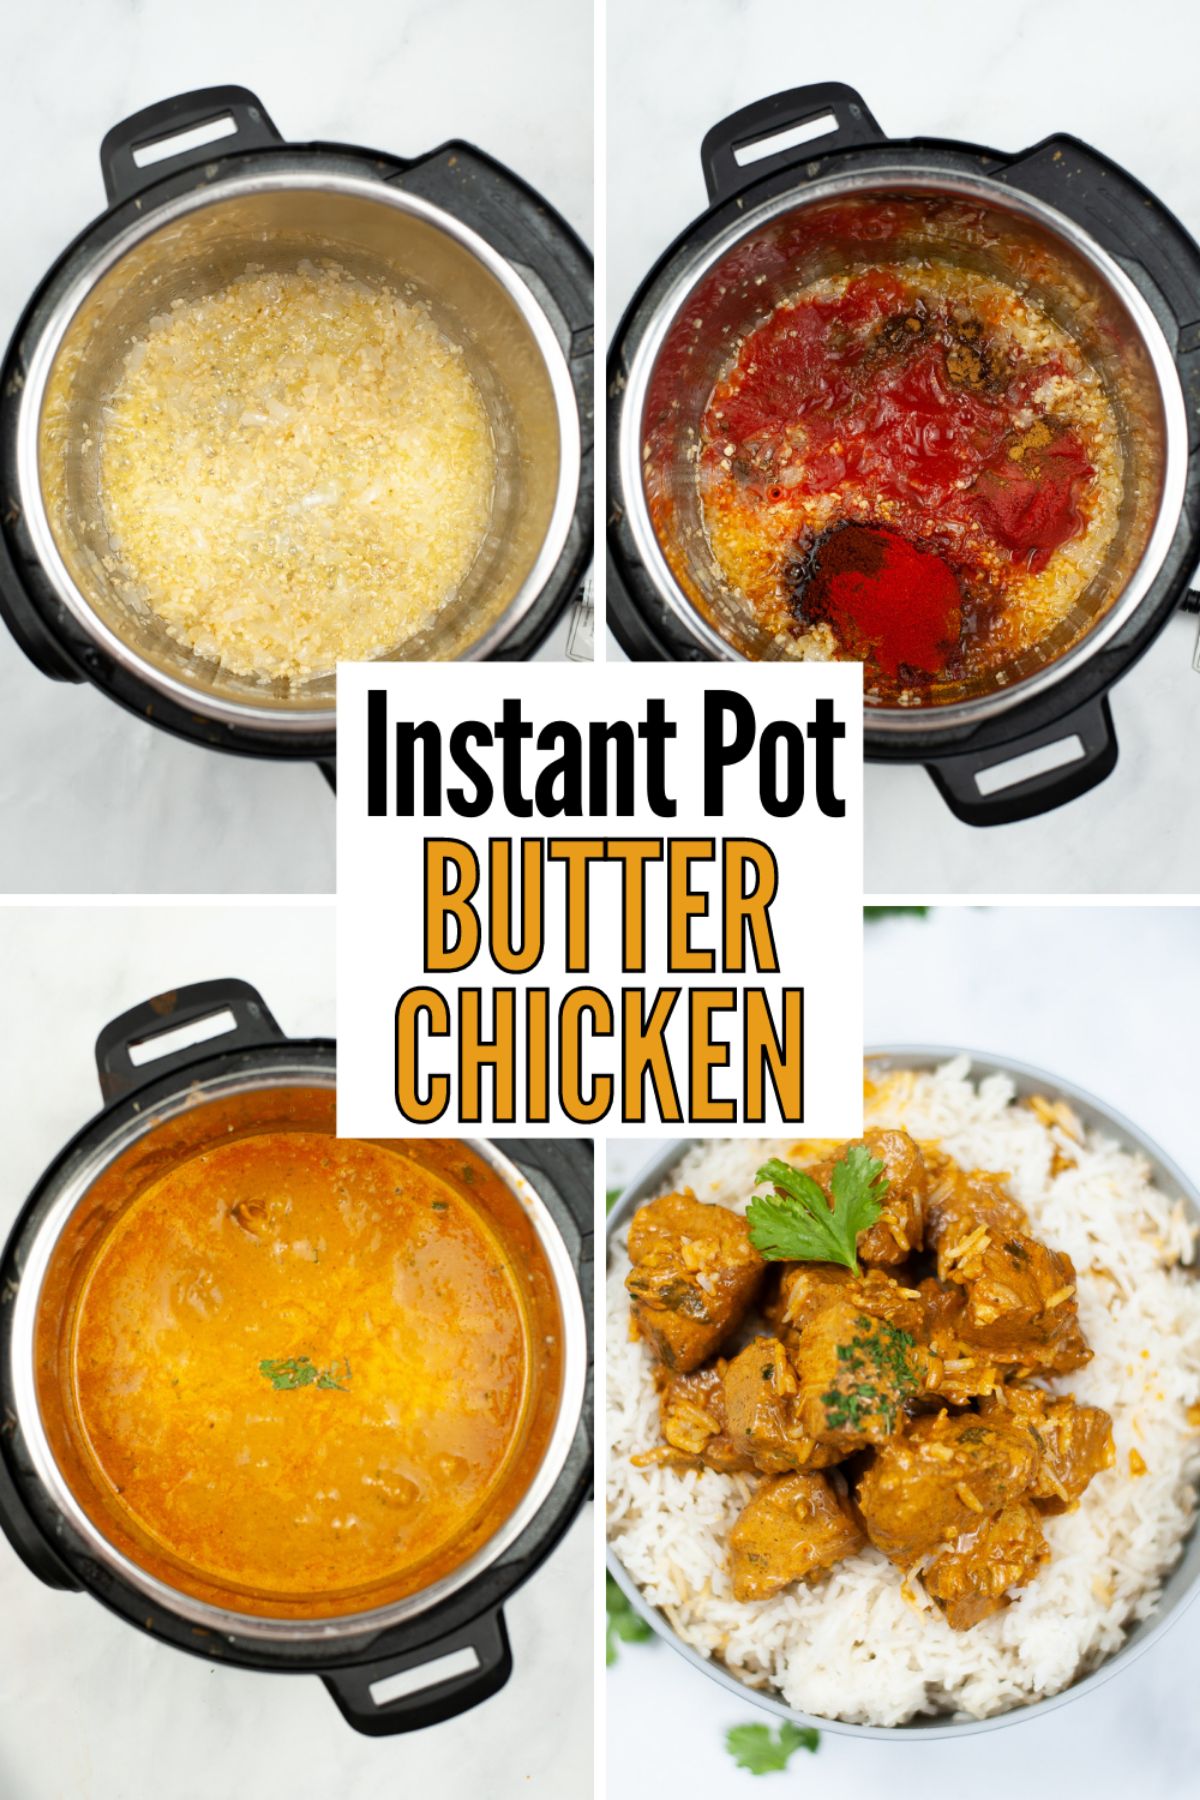 A collage of 4 images showing the process to make Instant Pot Butter Chicken.